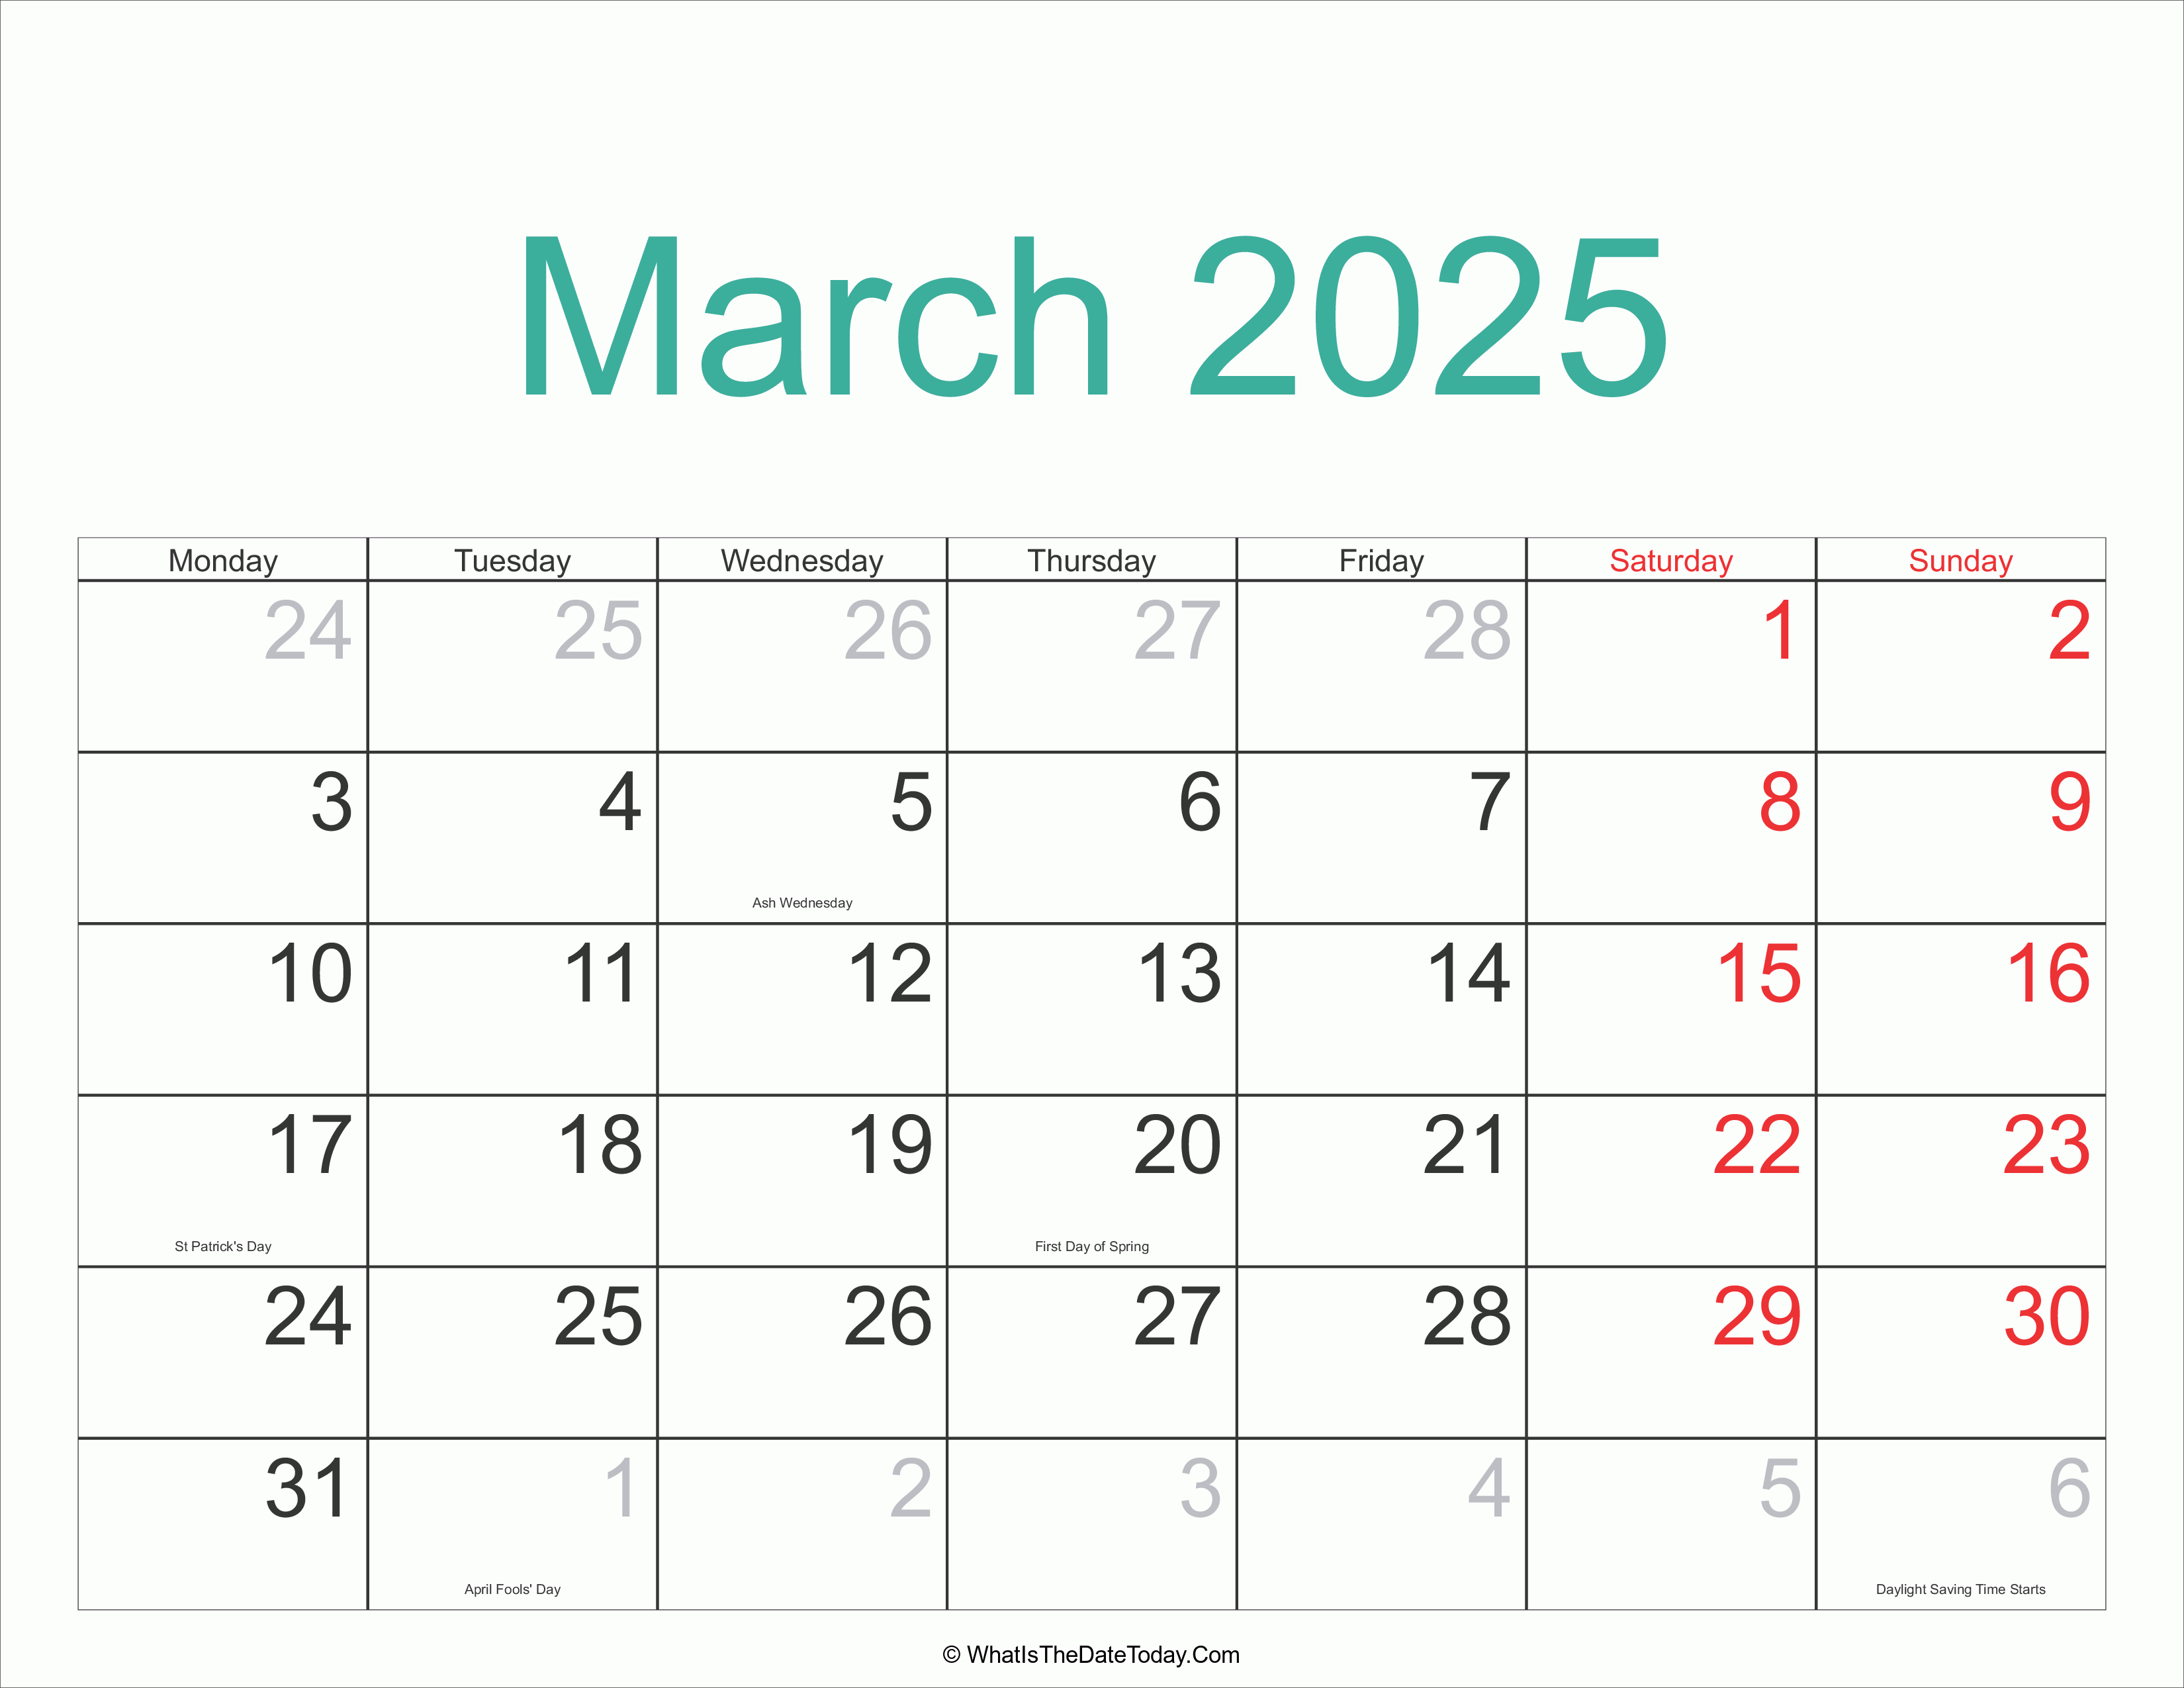 march-2025-calendar-printable-with-holidays-whatisthedatetoday-com